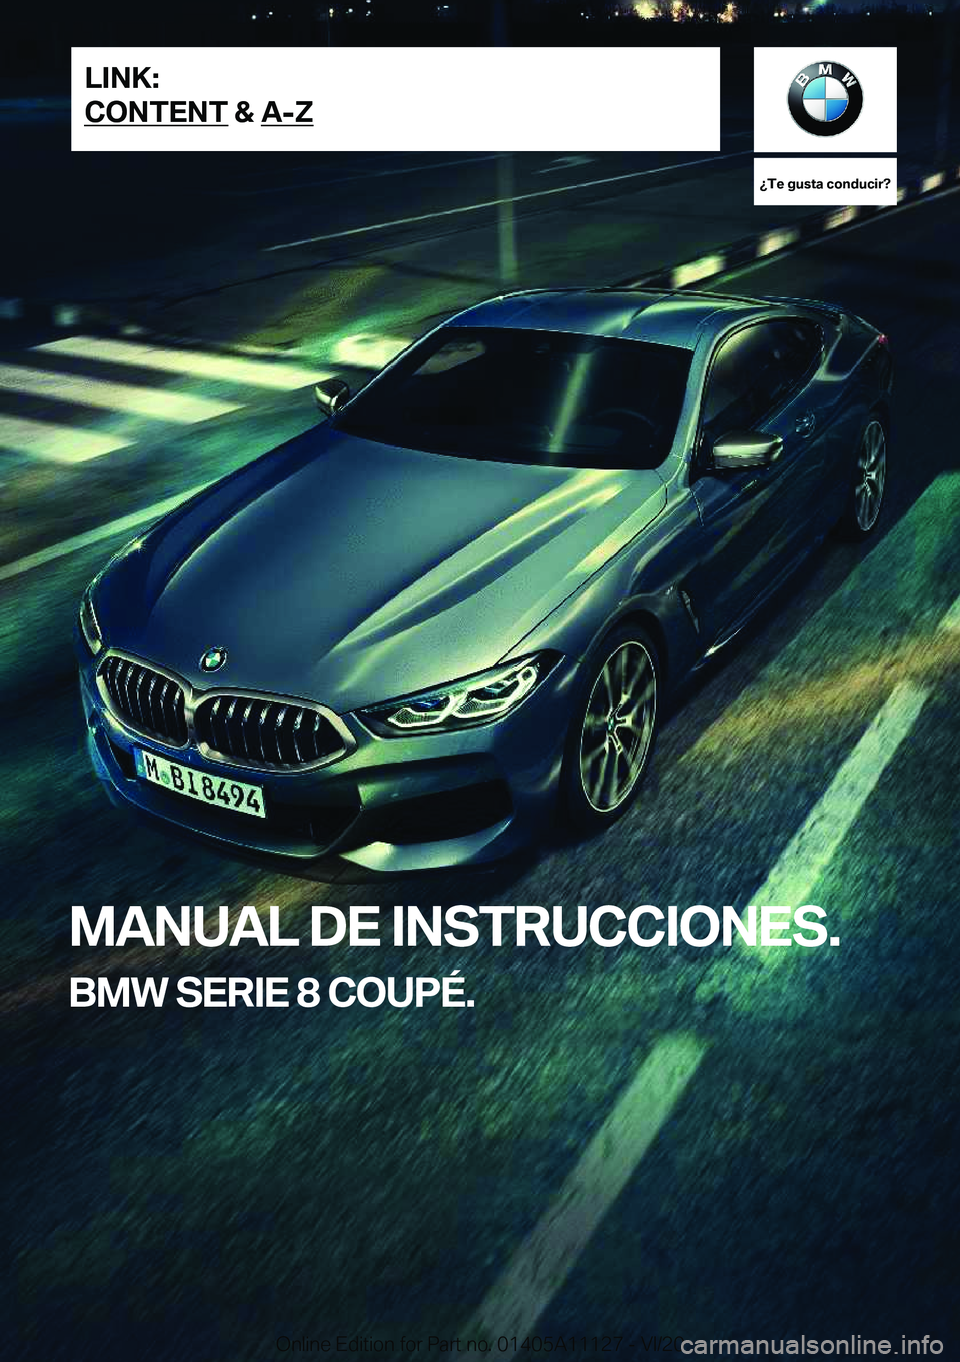 BMW 8 SERIES COUPE 2021  Manuales de Empleo (in Spanish) ��T�e��g�u�s�t�a��c�o�n�d�u�c�i�r� 
�M�A�N�U�A�L��D�E��I�N�S�T�R�U�C�C�I�O�N�E�S�.
�B�M�W��S�E�R�I�E��8��C�O�U�P�